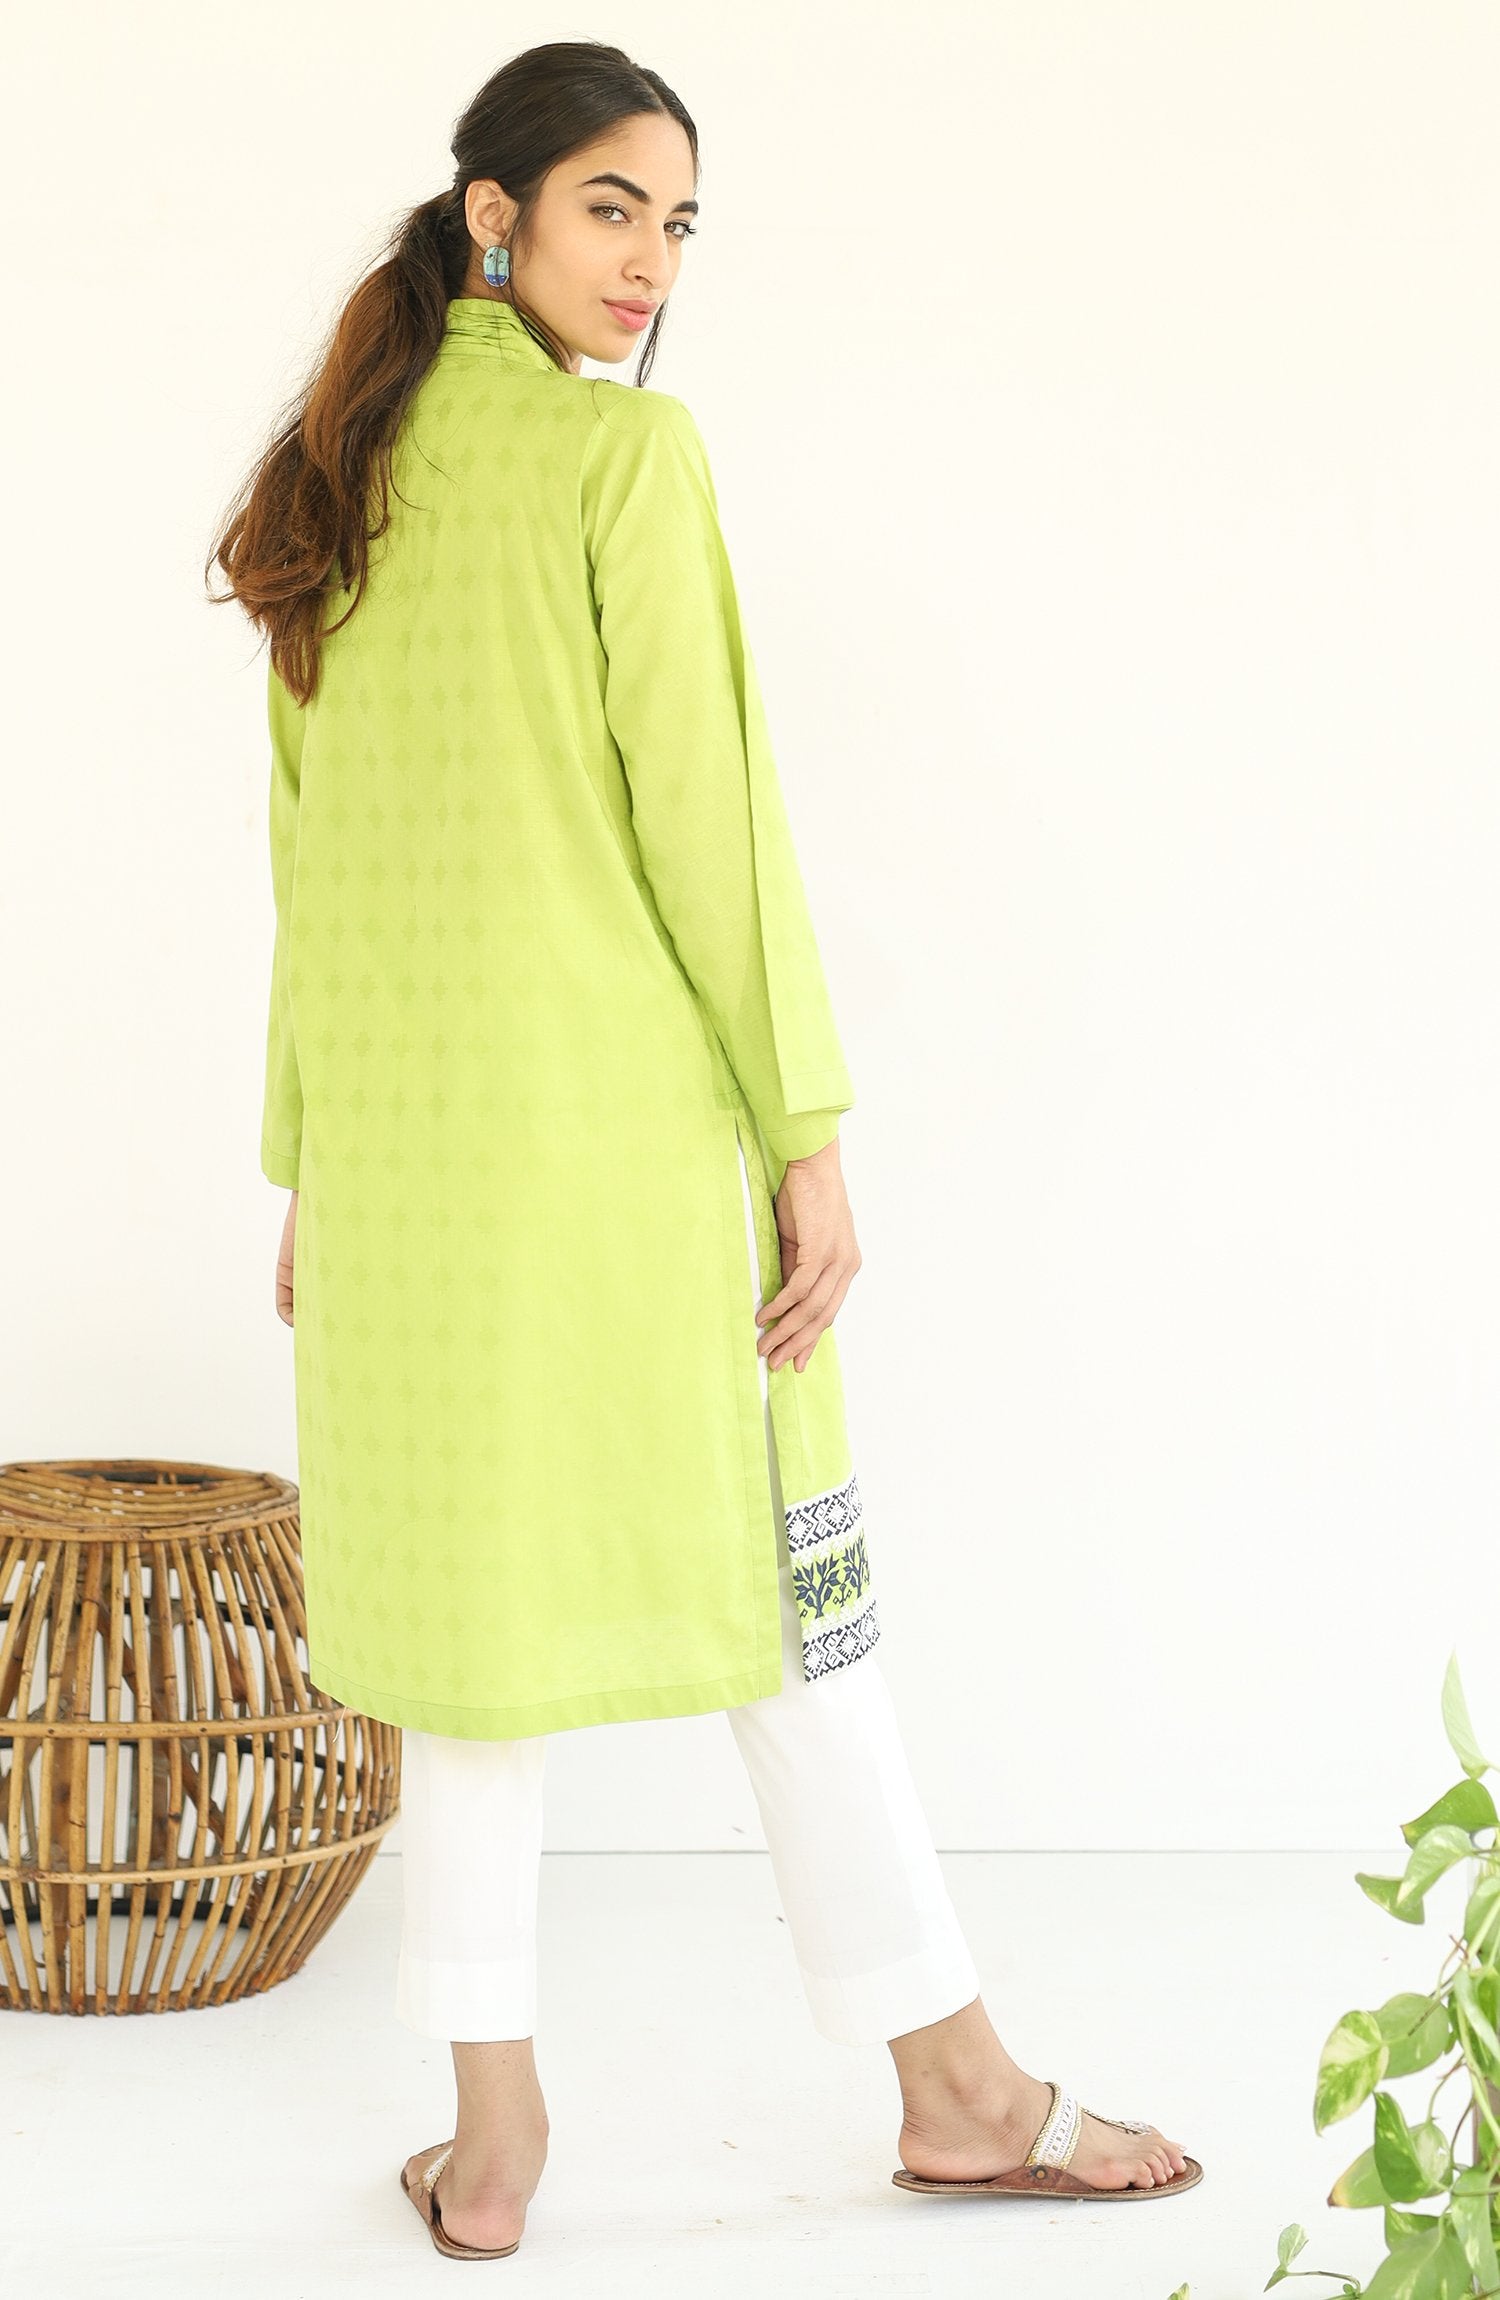 Stitched 1 Piece Embroidered Jacquard Shirt (nrds-152)